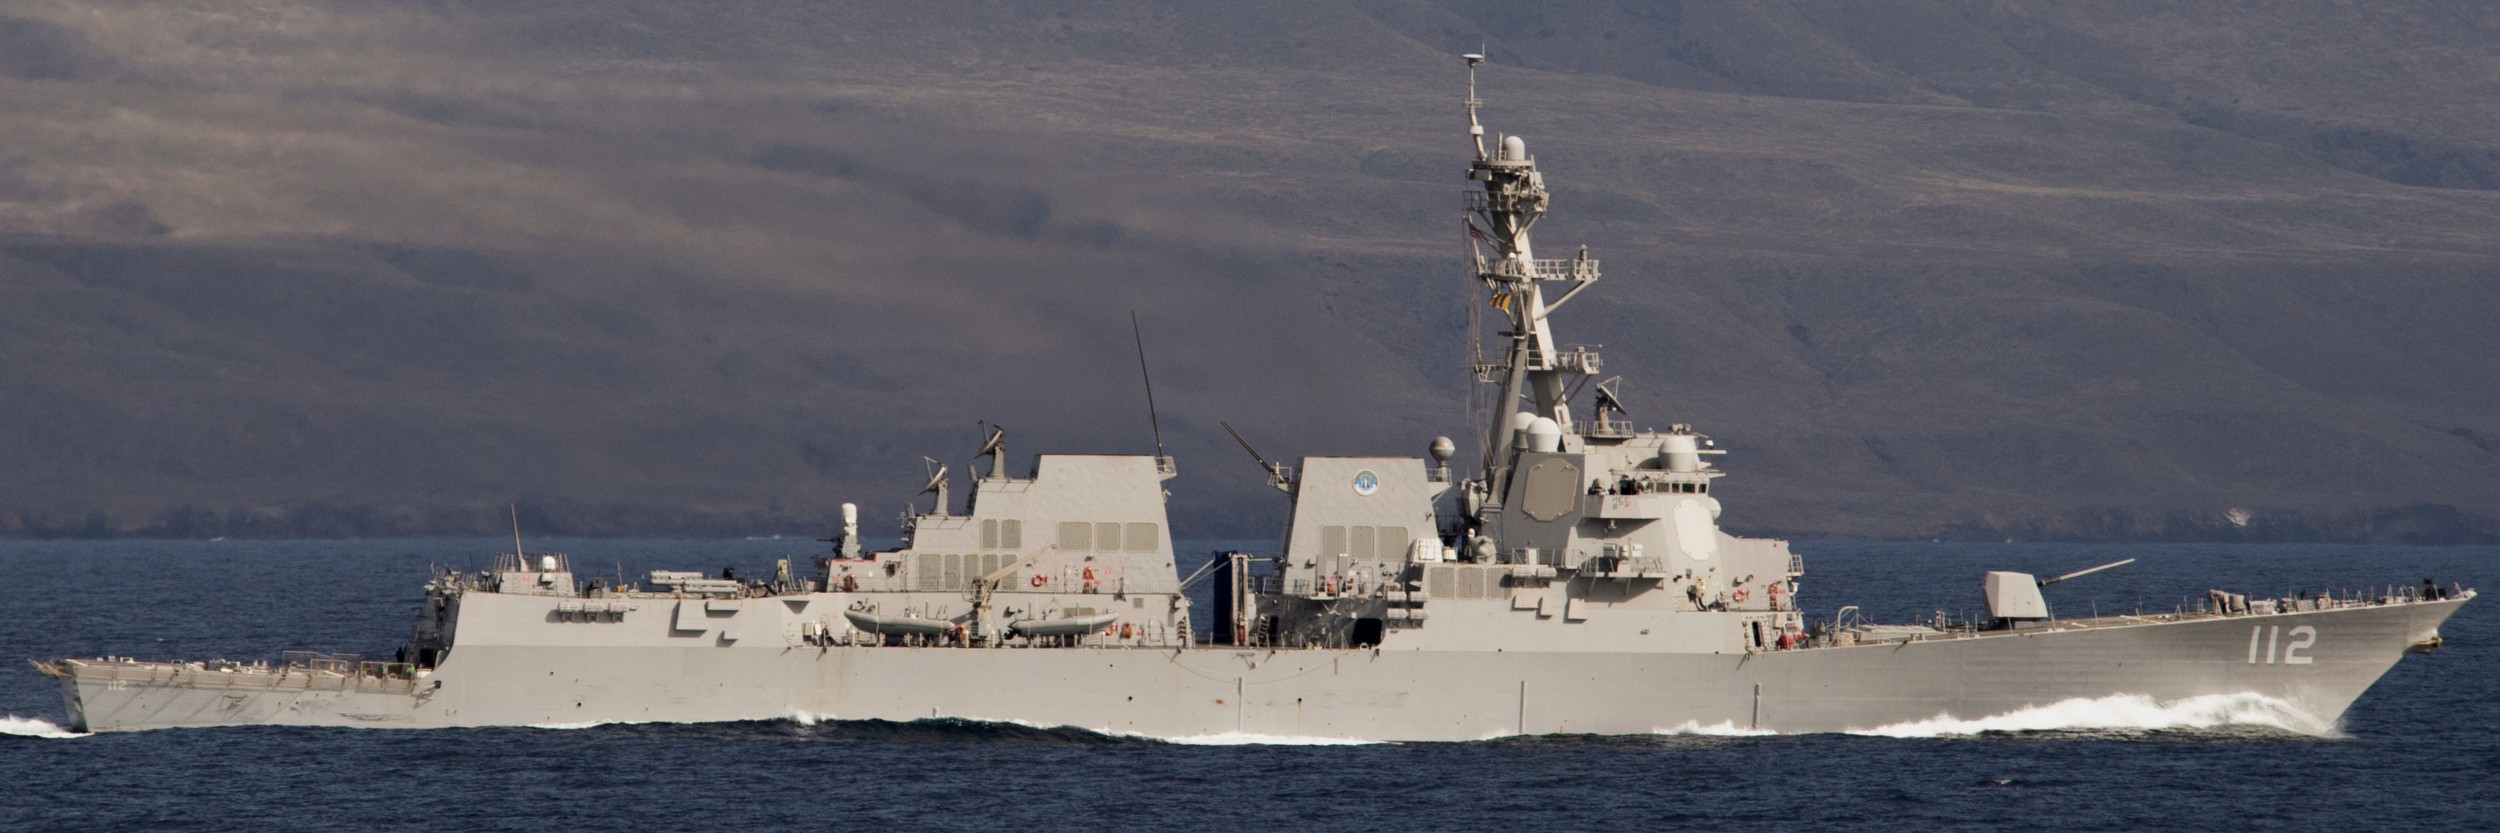 ddg-112 uss michael murphy arleigh burke class guided missile destroyer aegis us navy 44